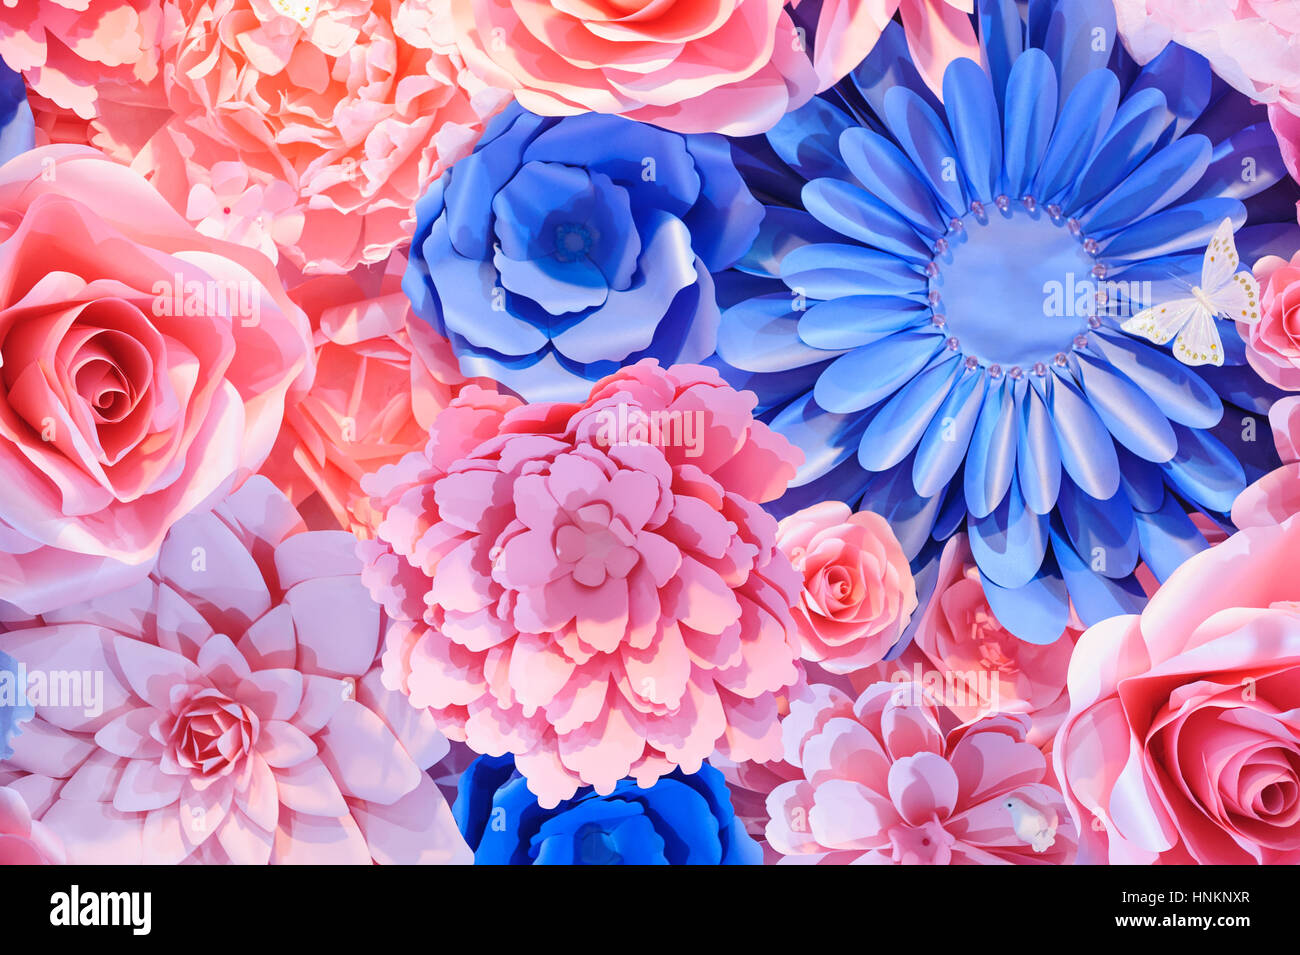 background of pink and blue colors for holiday decor Stock Photo